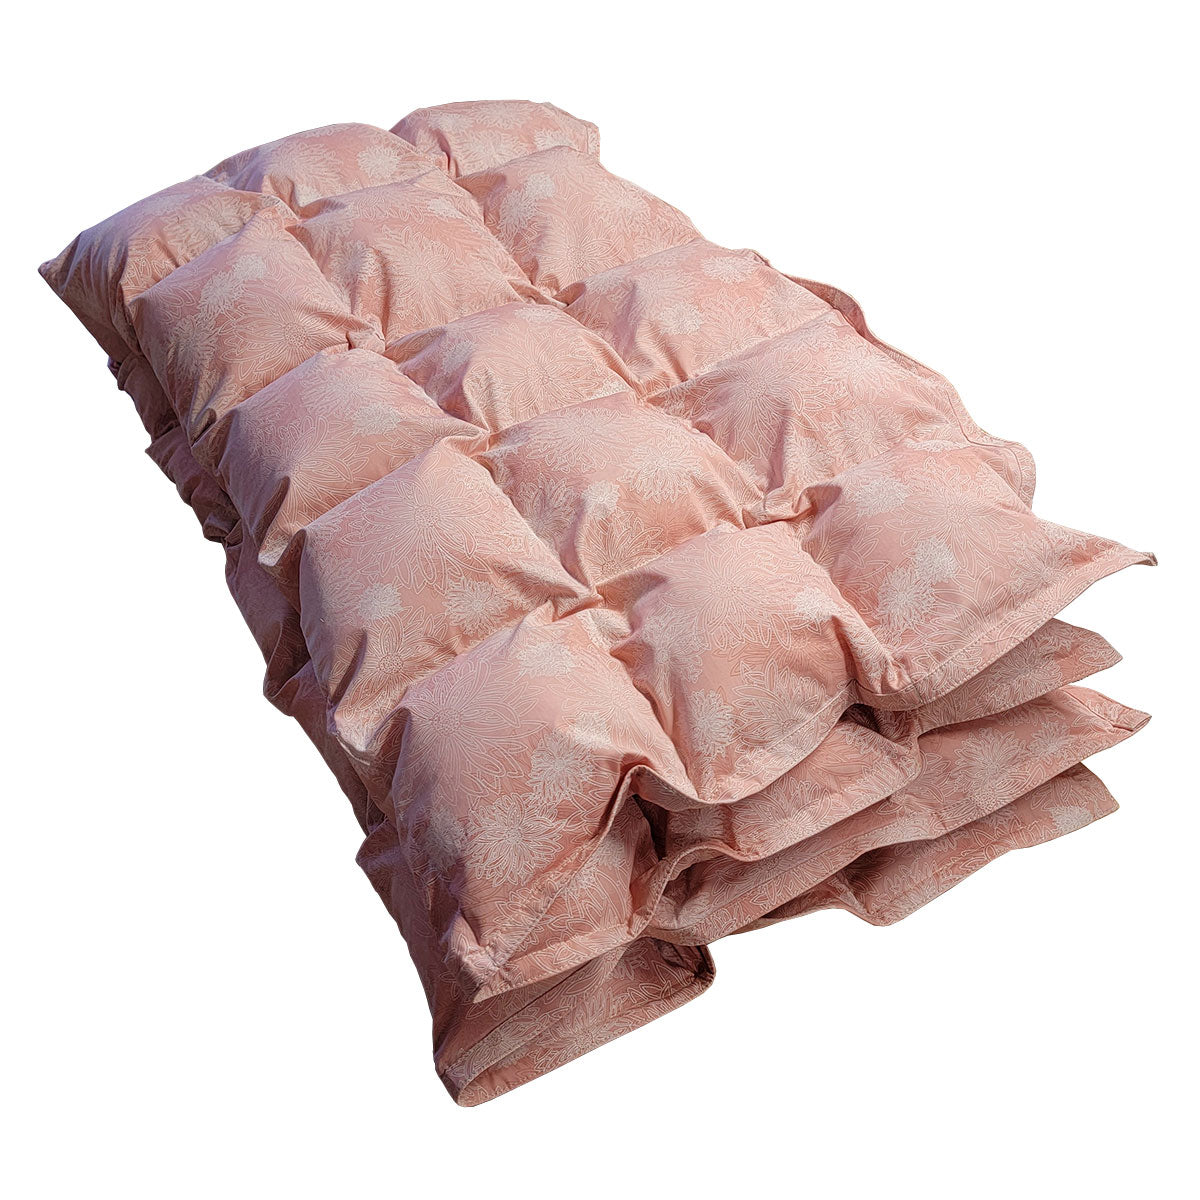 Classic Weighted Blanket - Floral Petal Pink